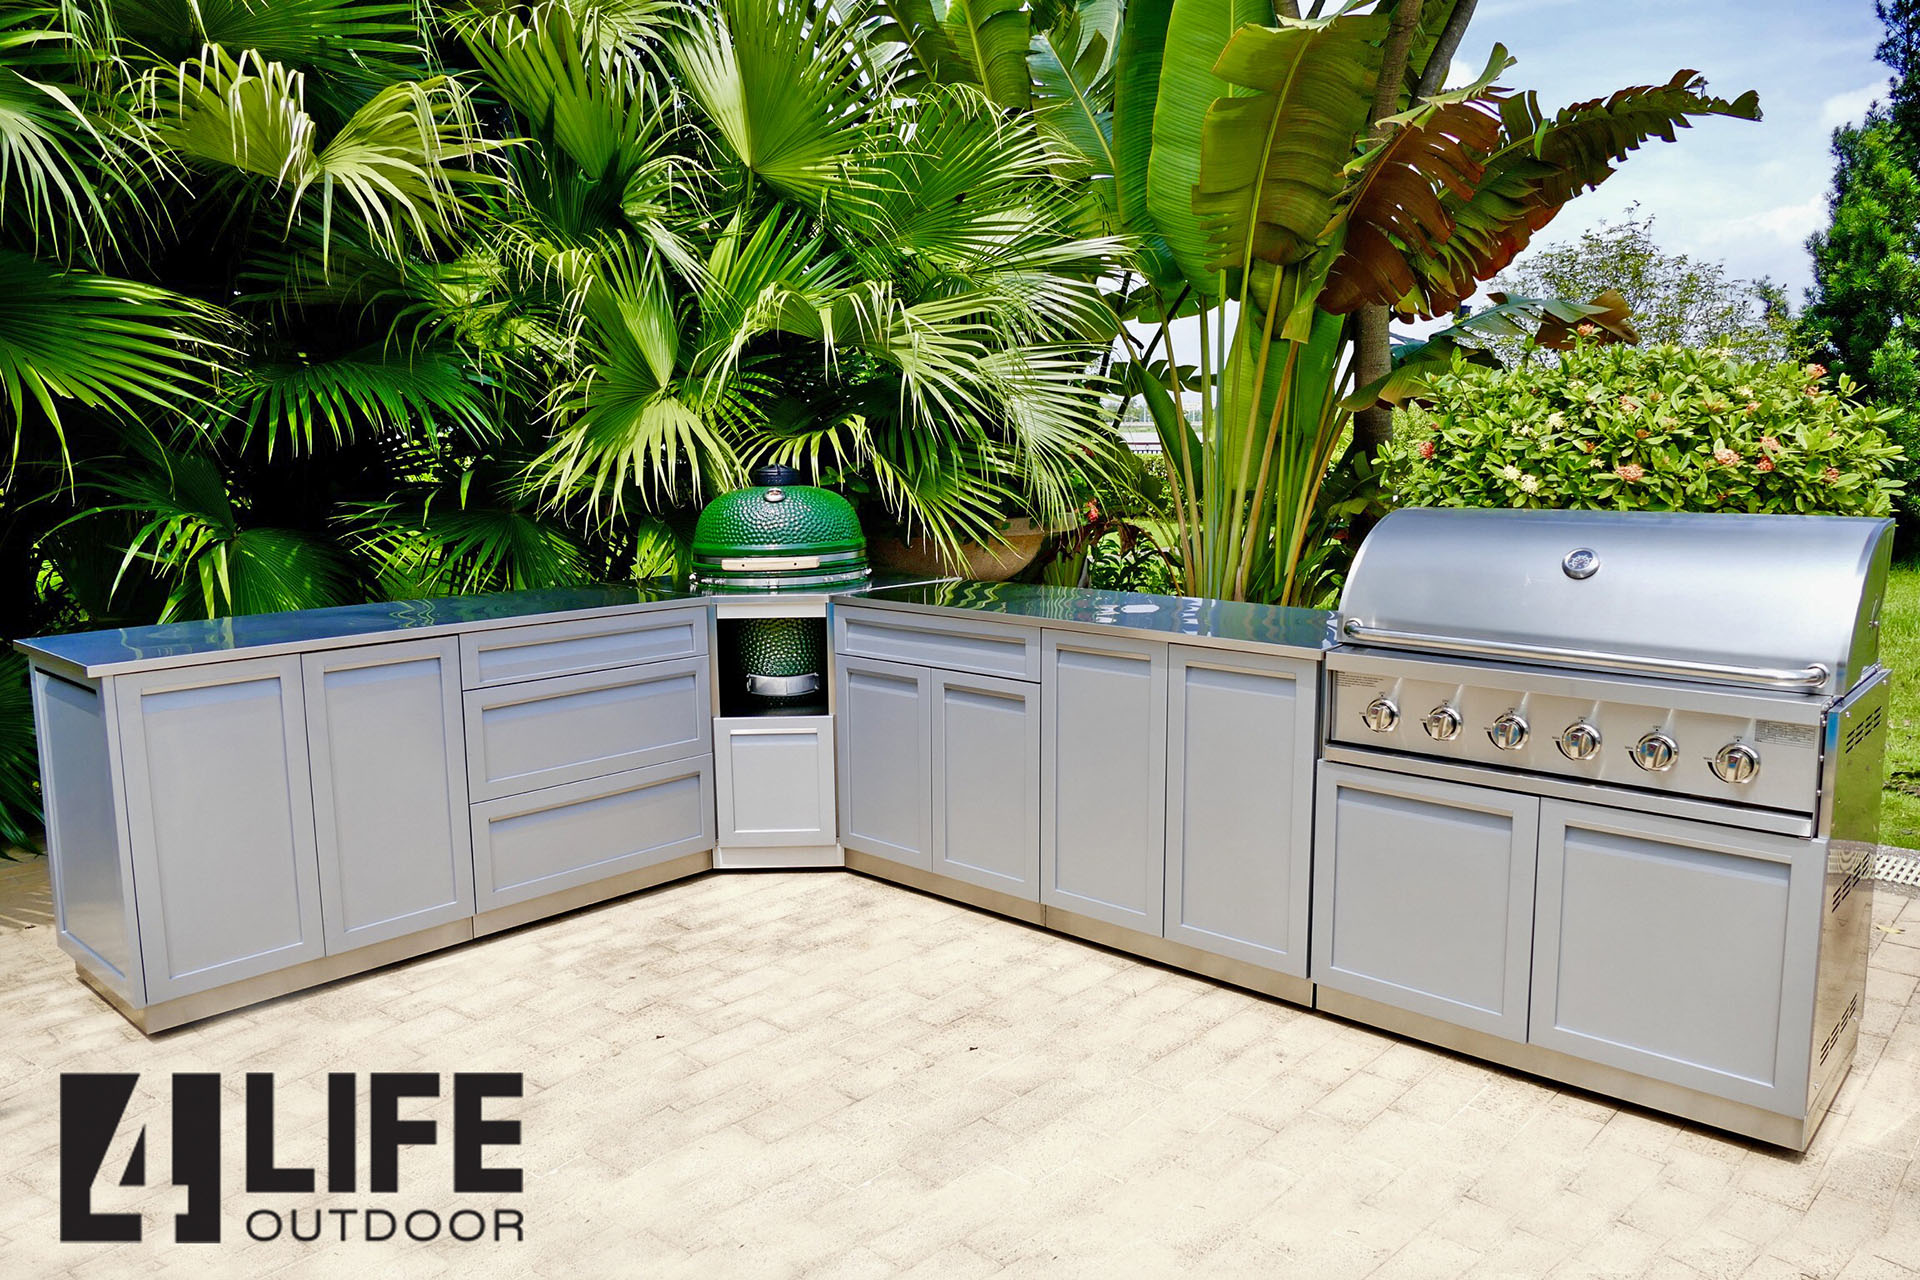 gray stainless steel outdoor kitchen cabinets